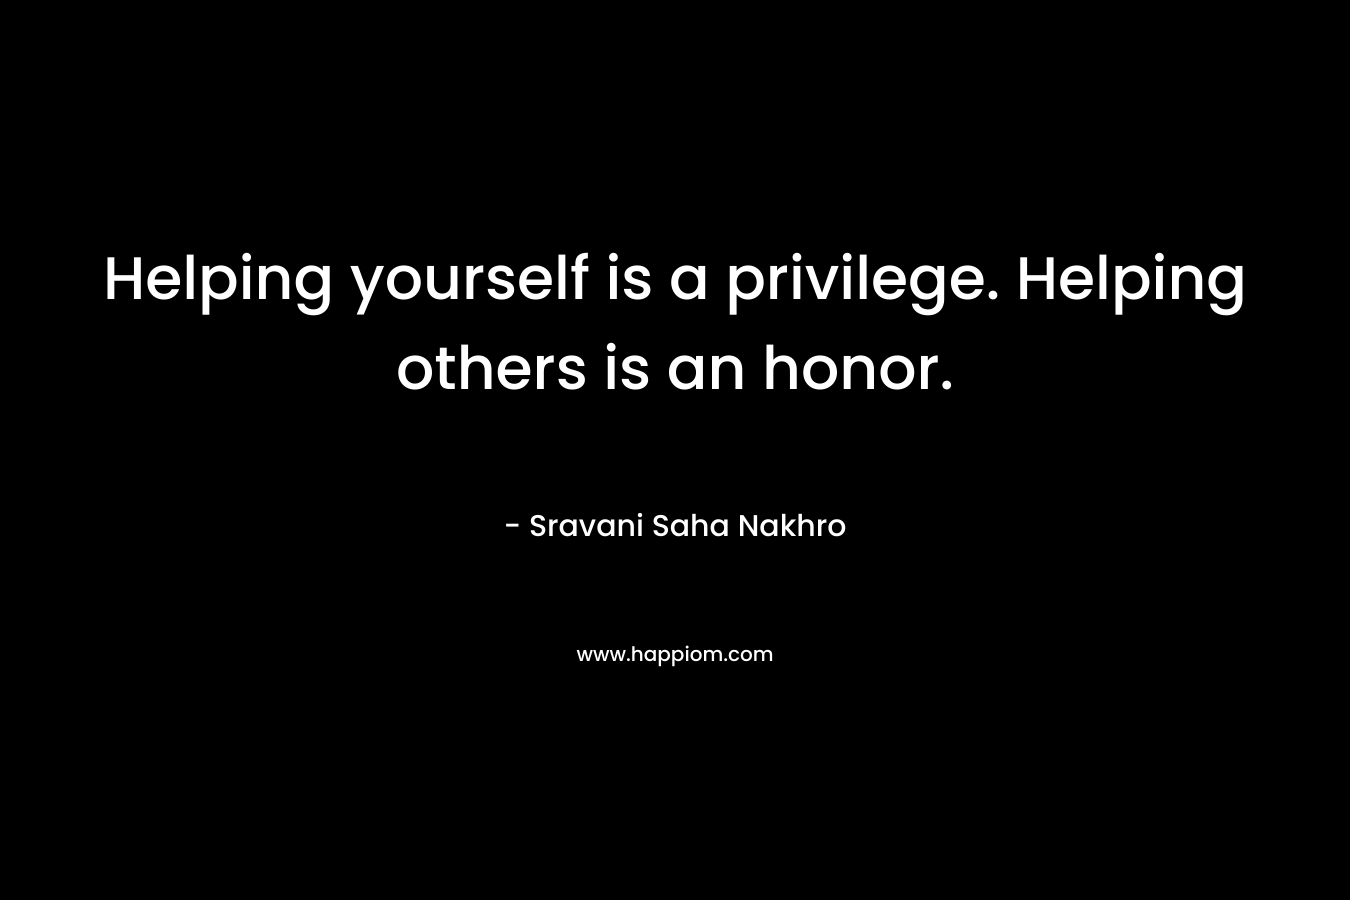 Helping yourself is a privilege. Helping others is an honor.